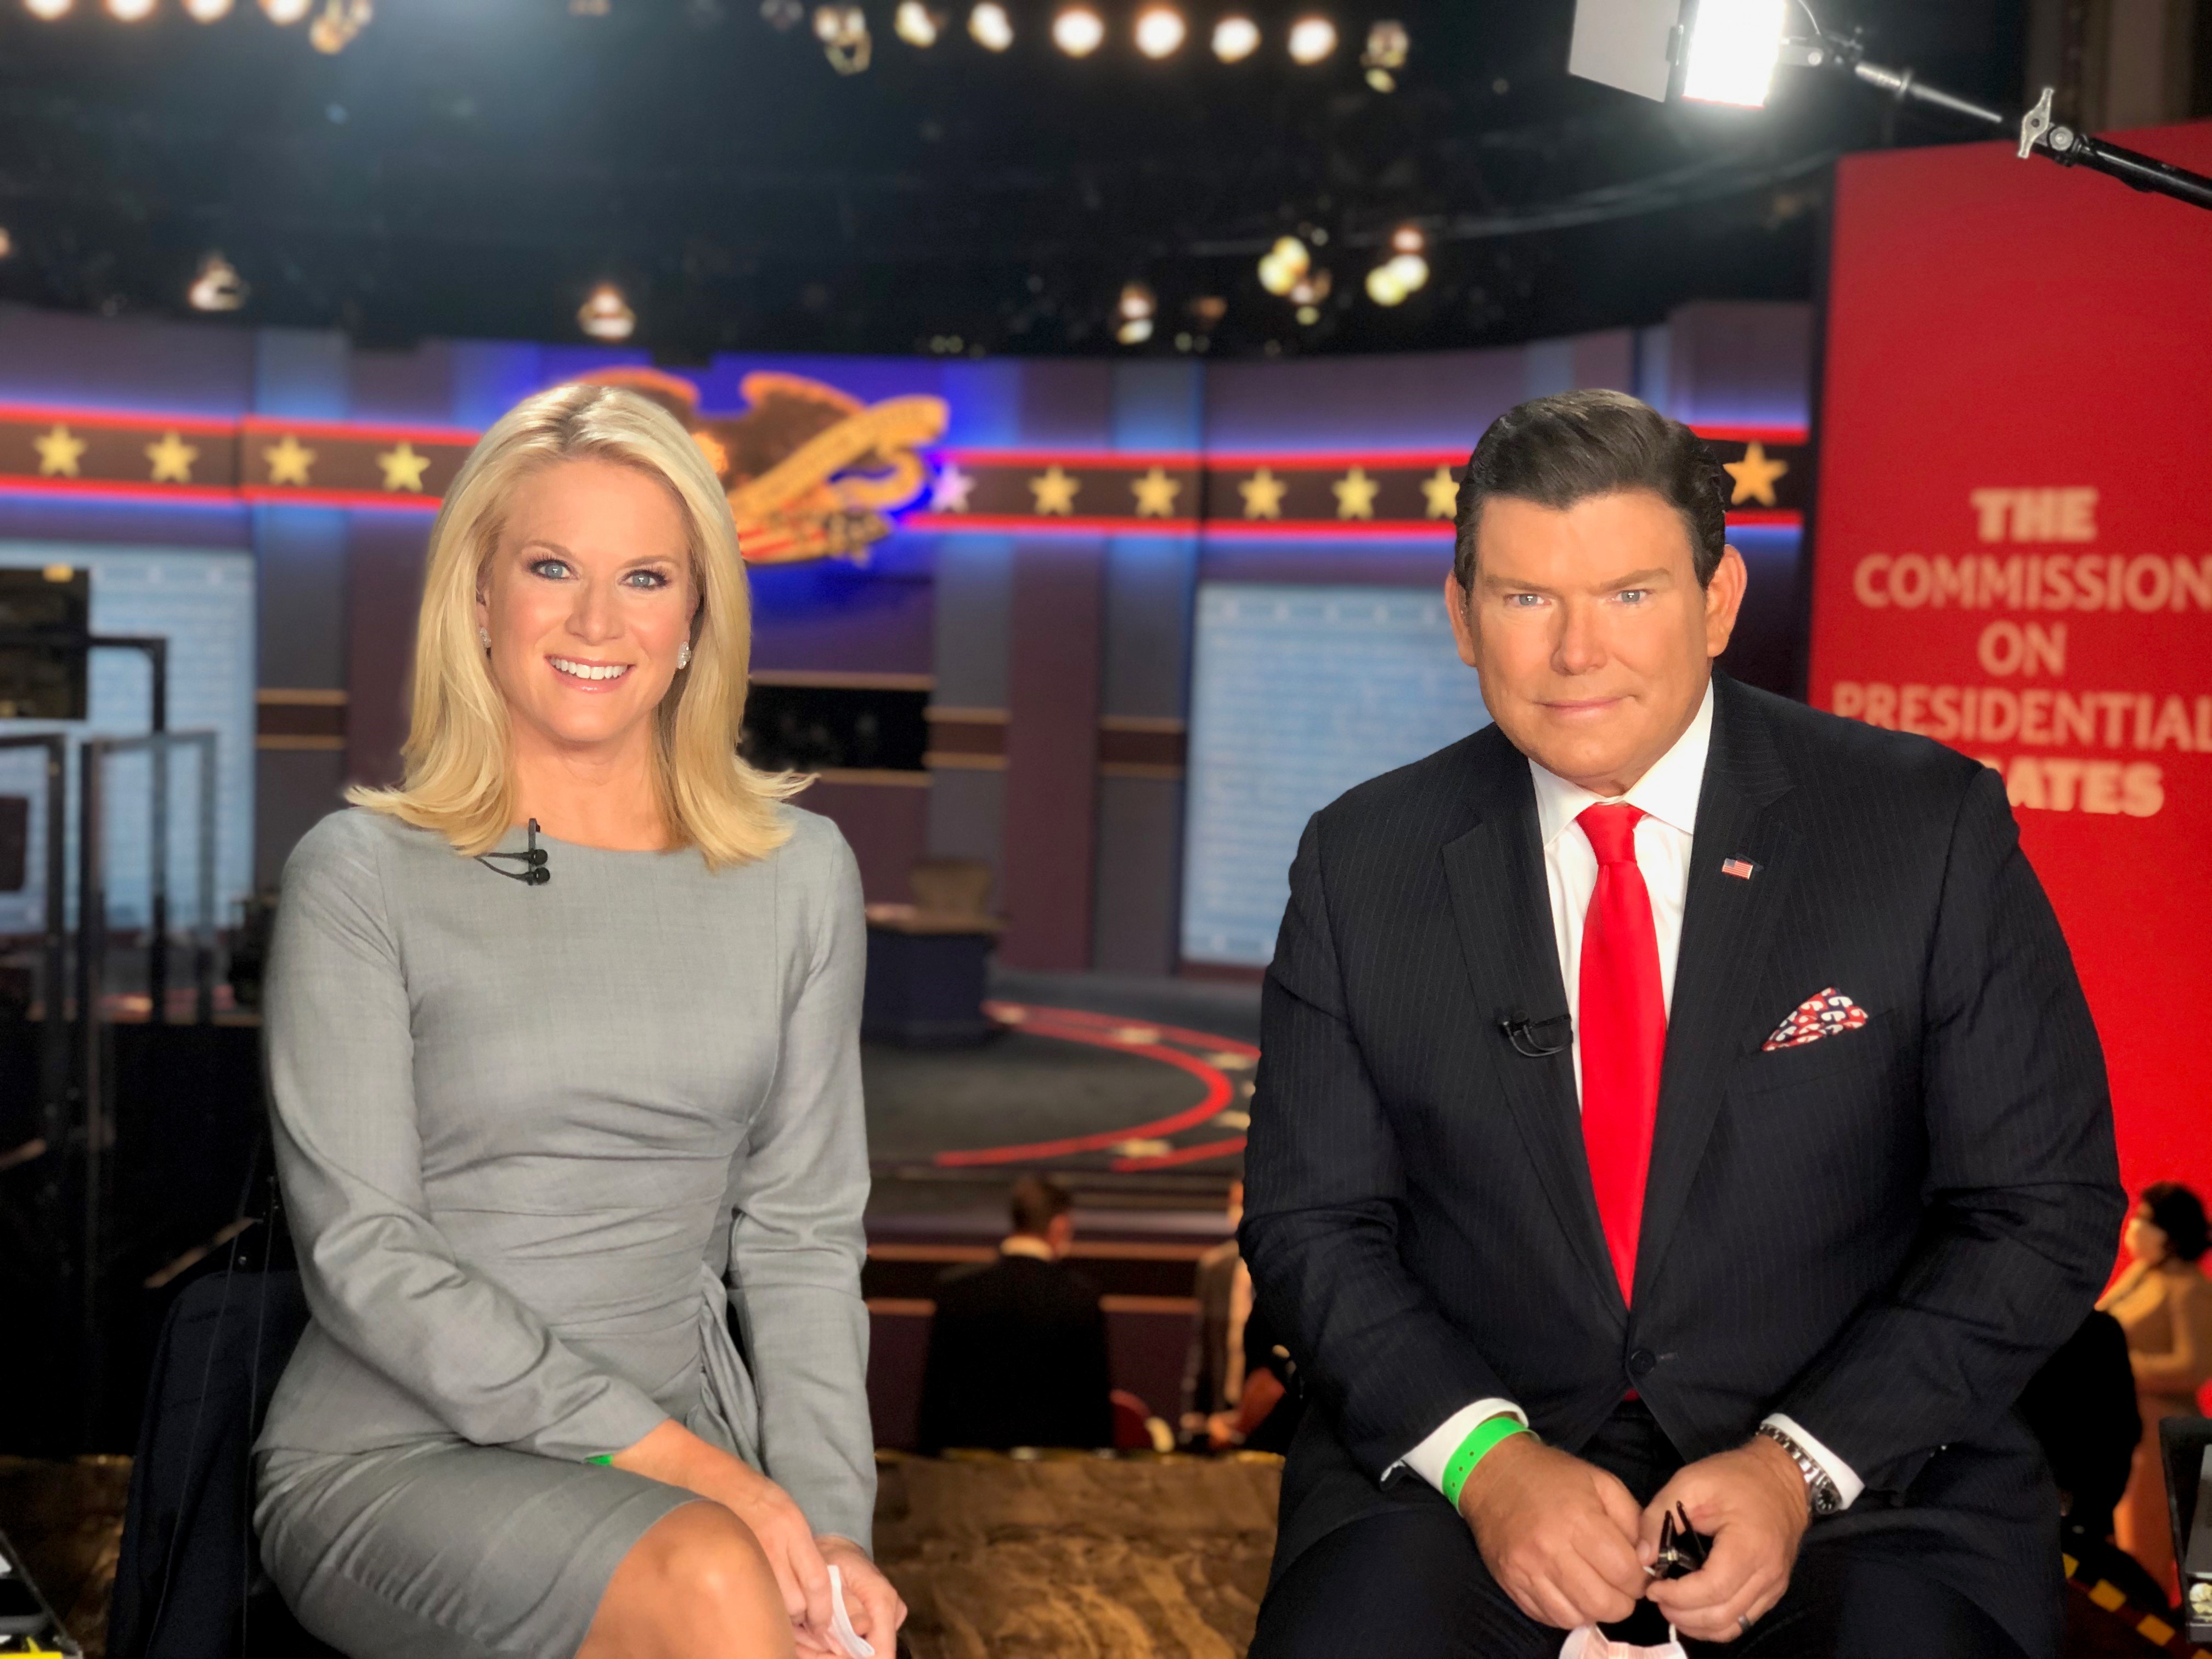 Weekly Cable Ratings Vp Debate Drives Ratings For Cable News Networks